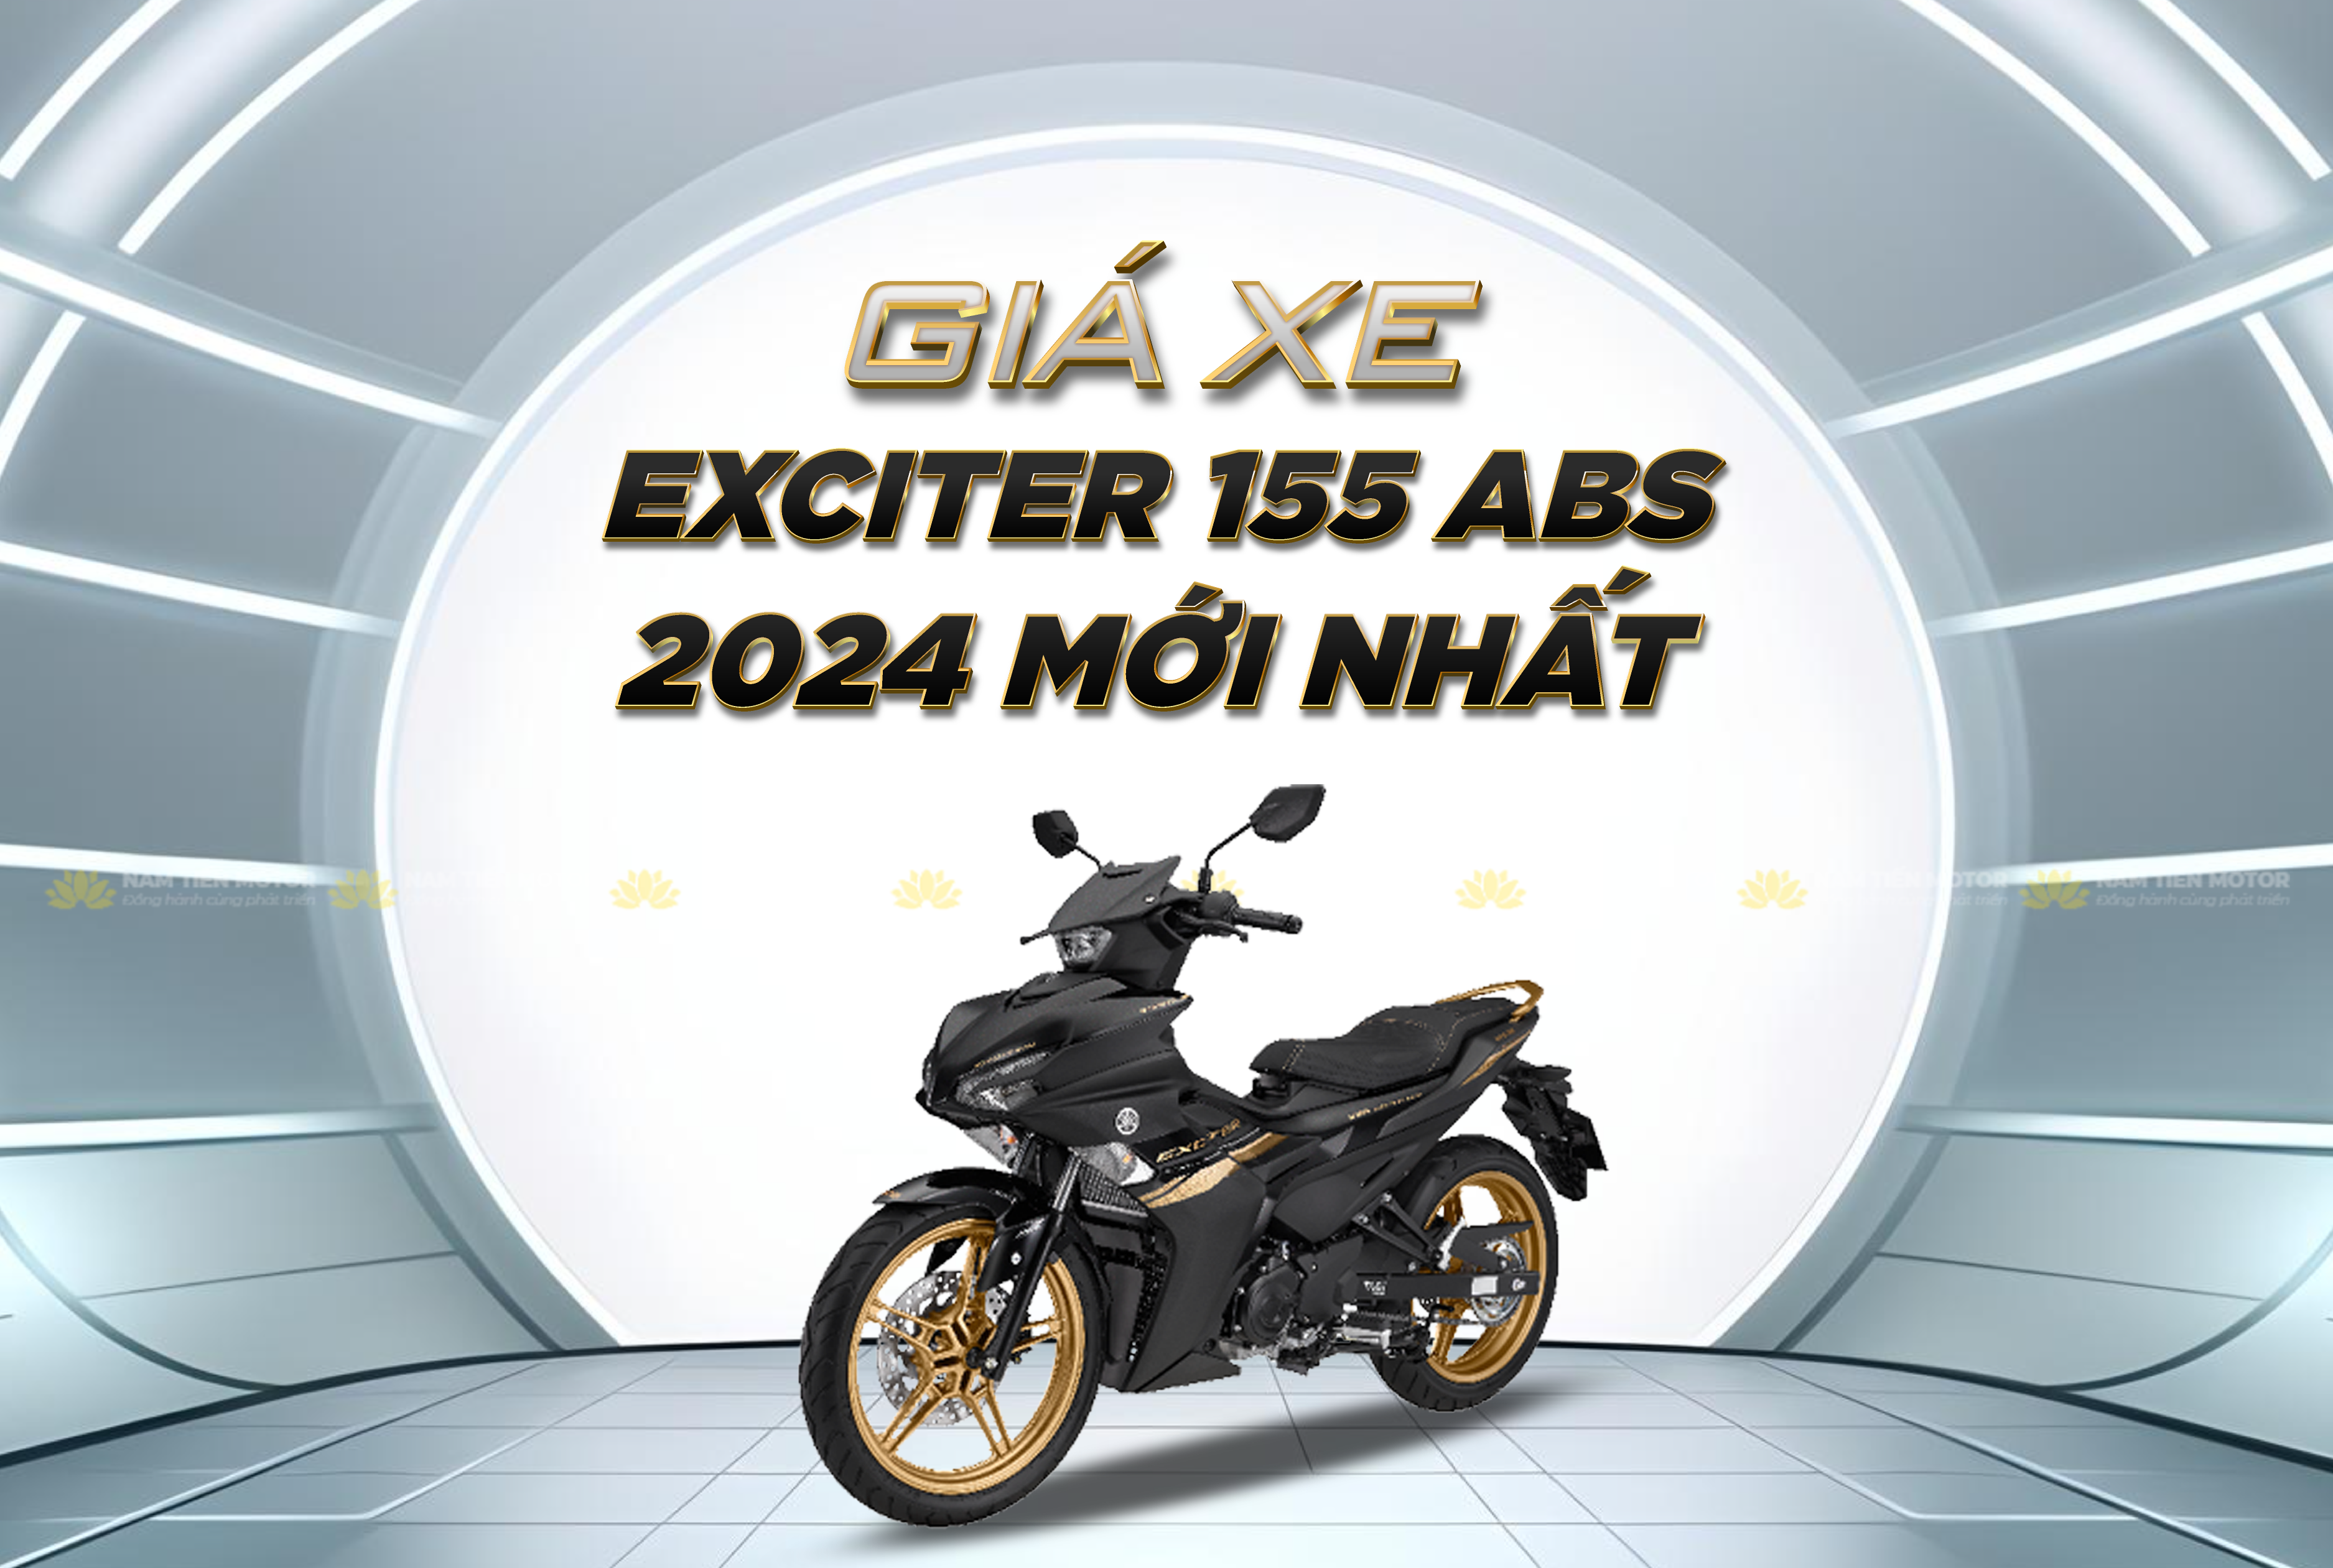 Giá xe Exciter 155 ABS 2024